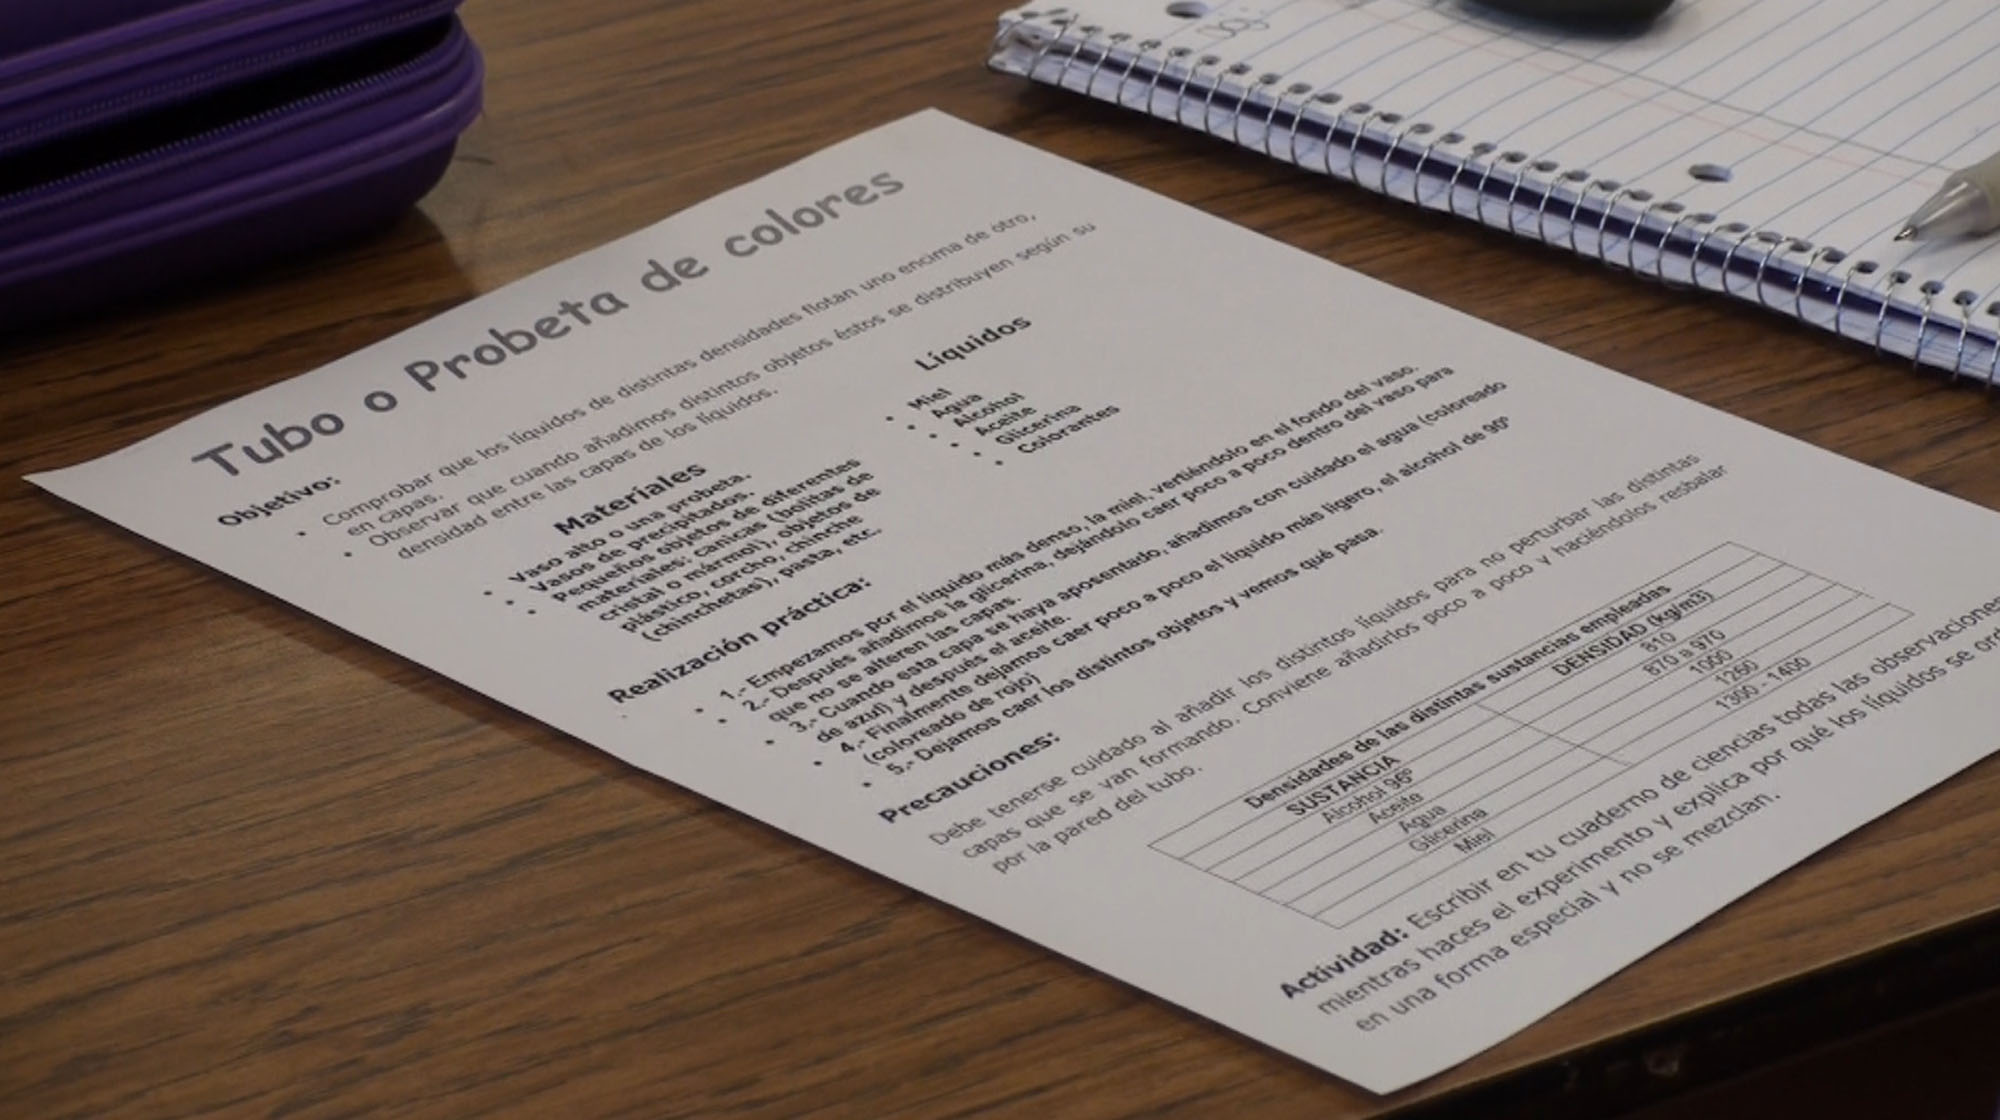 Directions for the experiments in Ordosgoitia's sixth grade science class are printed in Spanish.